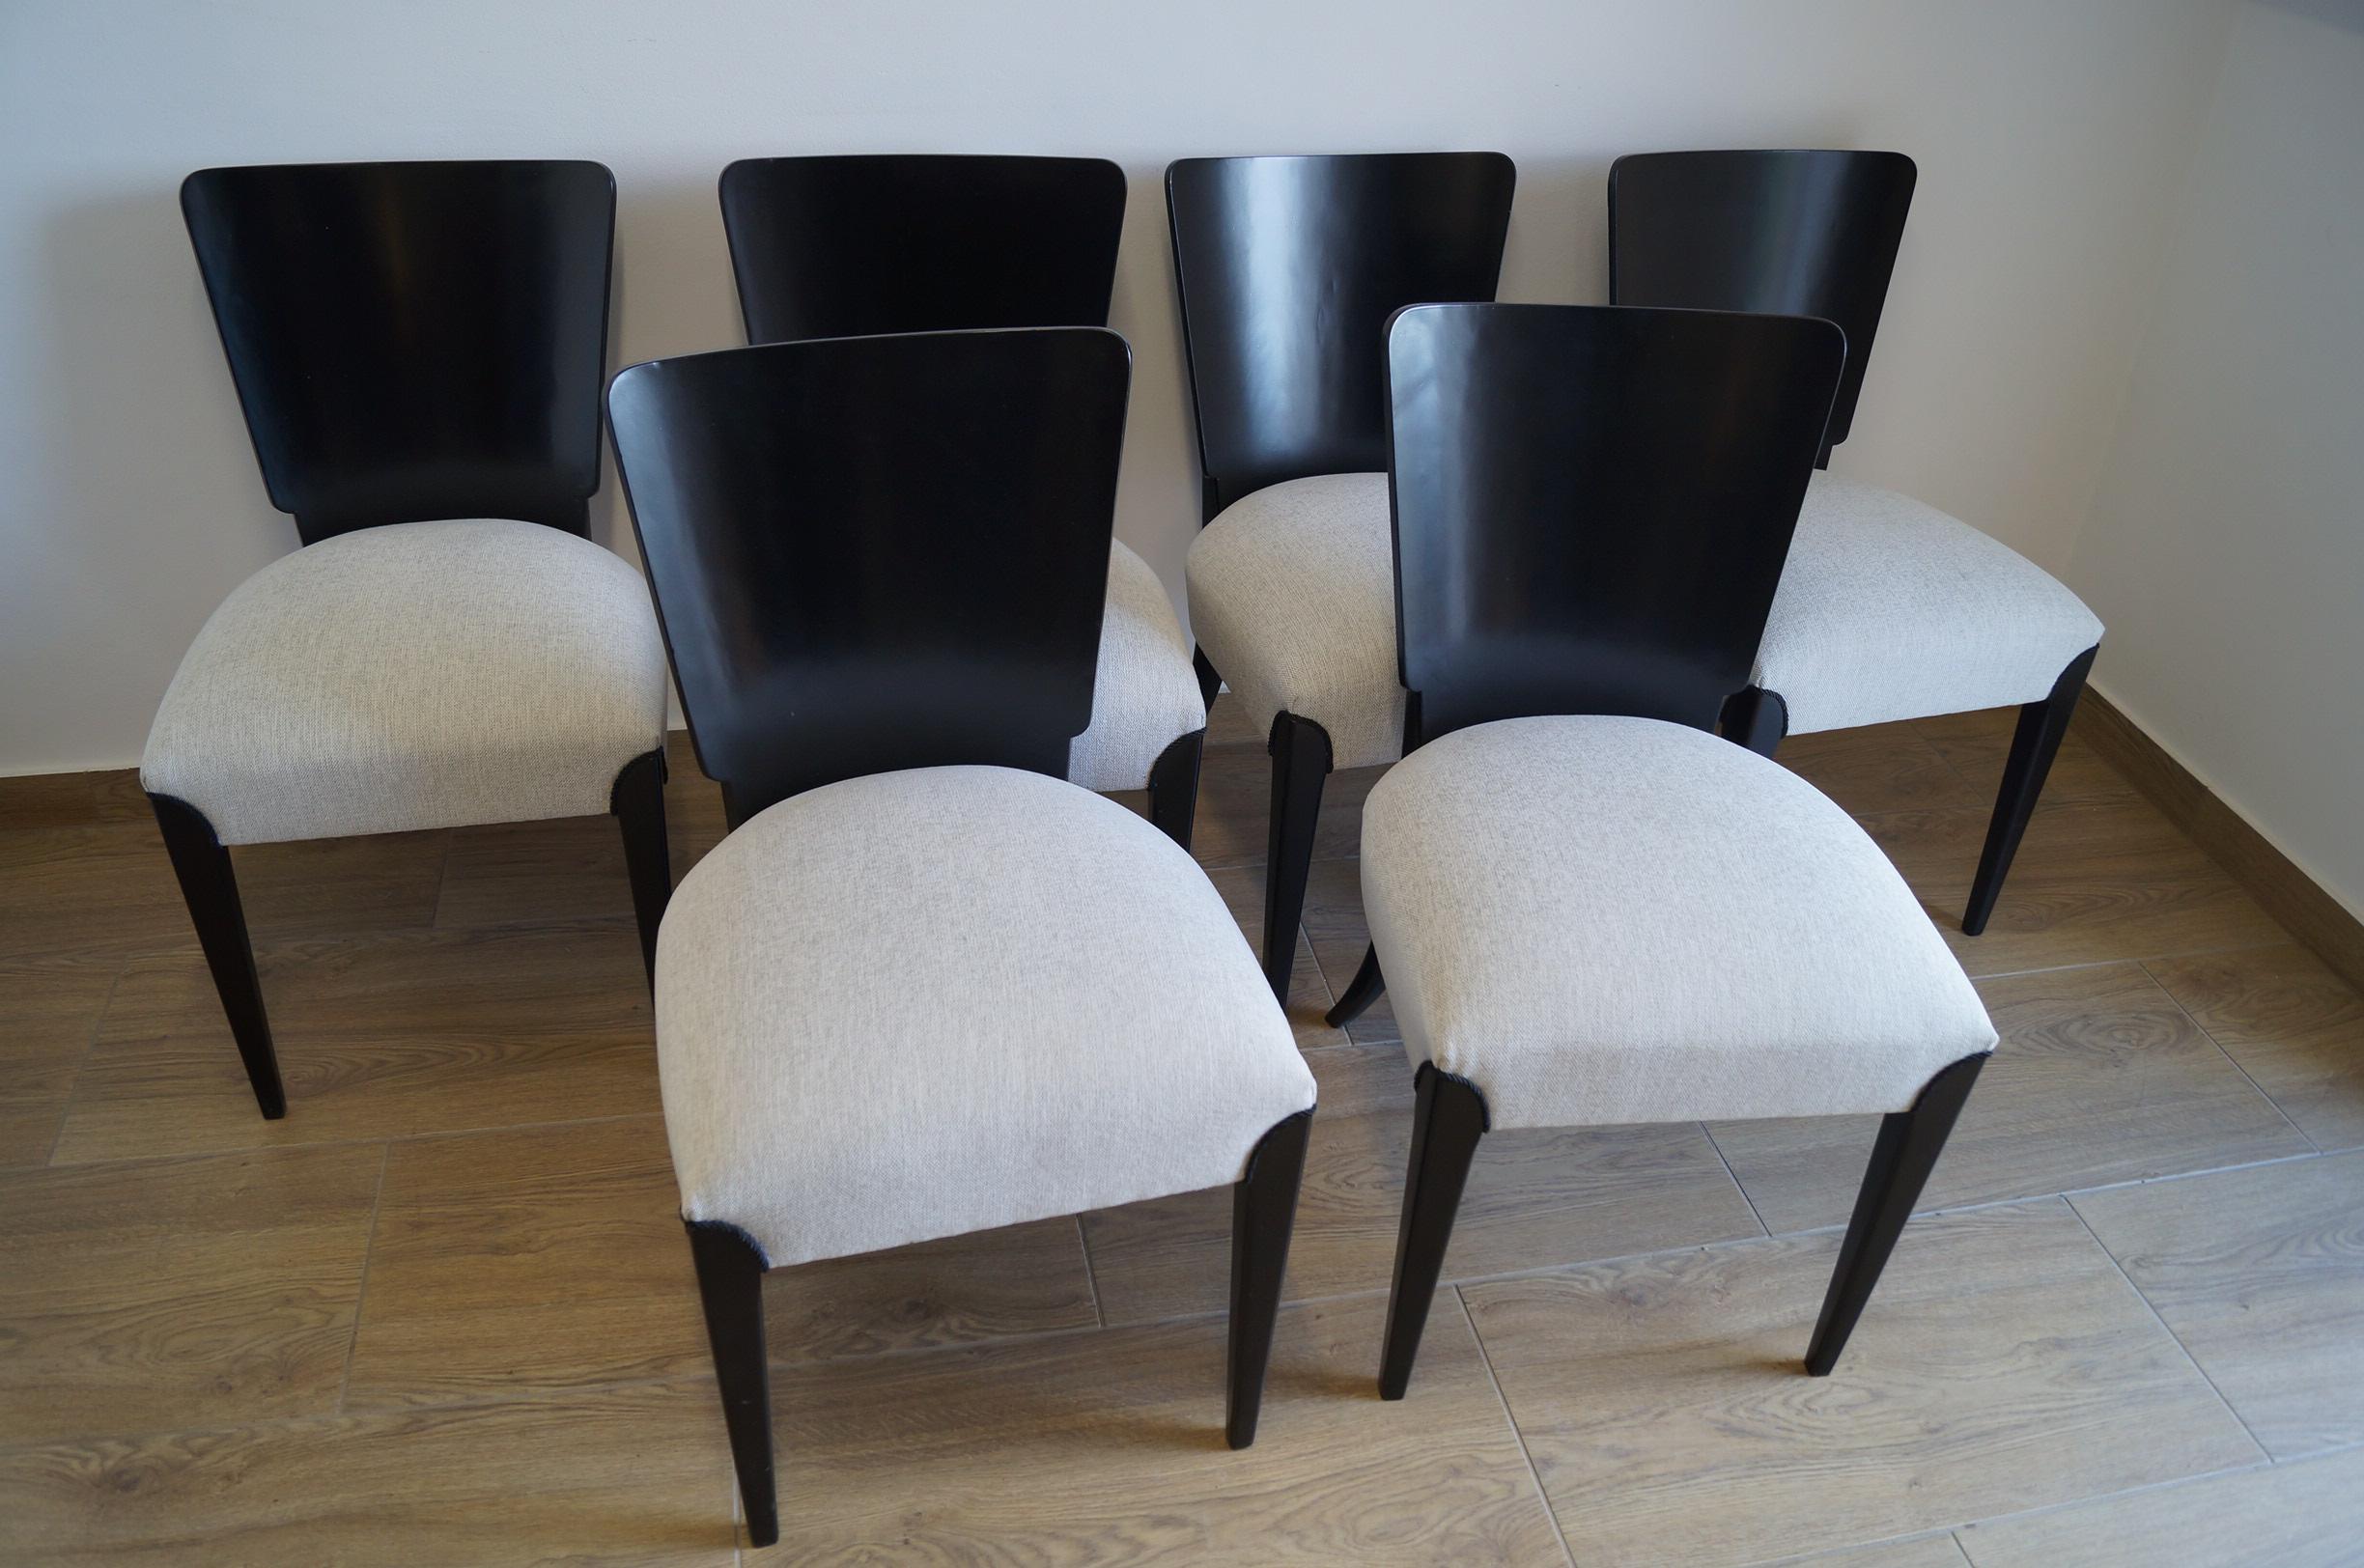 Art Deco four chairs by J.Halabala from 1950 we present the chairs by J.Halabala from 1950s (a Czech designer ranked among the most outstanding creators of the modern period. The peak of his career fell on the 1930s and 1940s when he worked for a